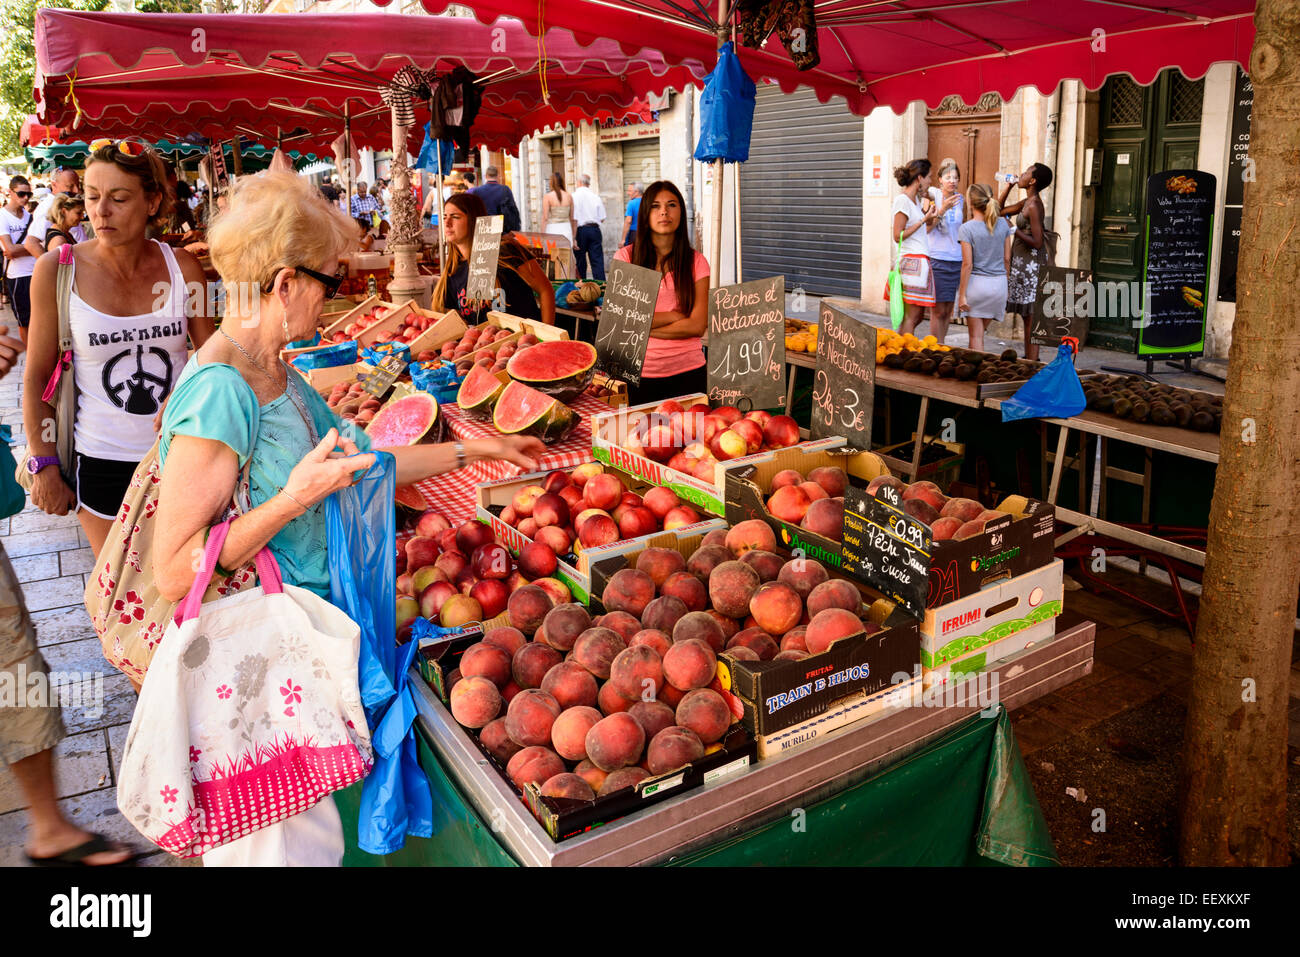 Fruit stall holder serving customers at Outdoor Market, Toulon, Var, PACA (Provence-Alpes-Cote d'Azur), France Stock Photo